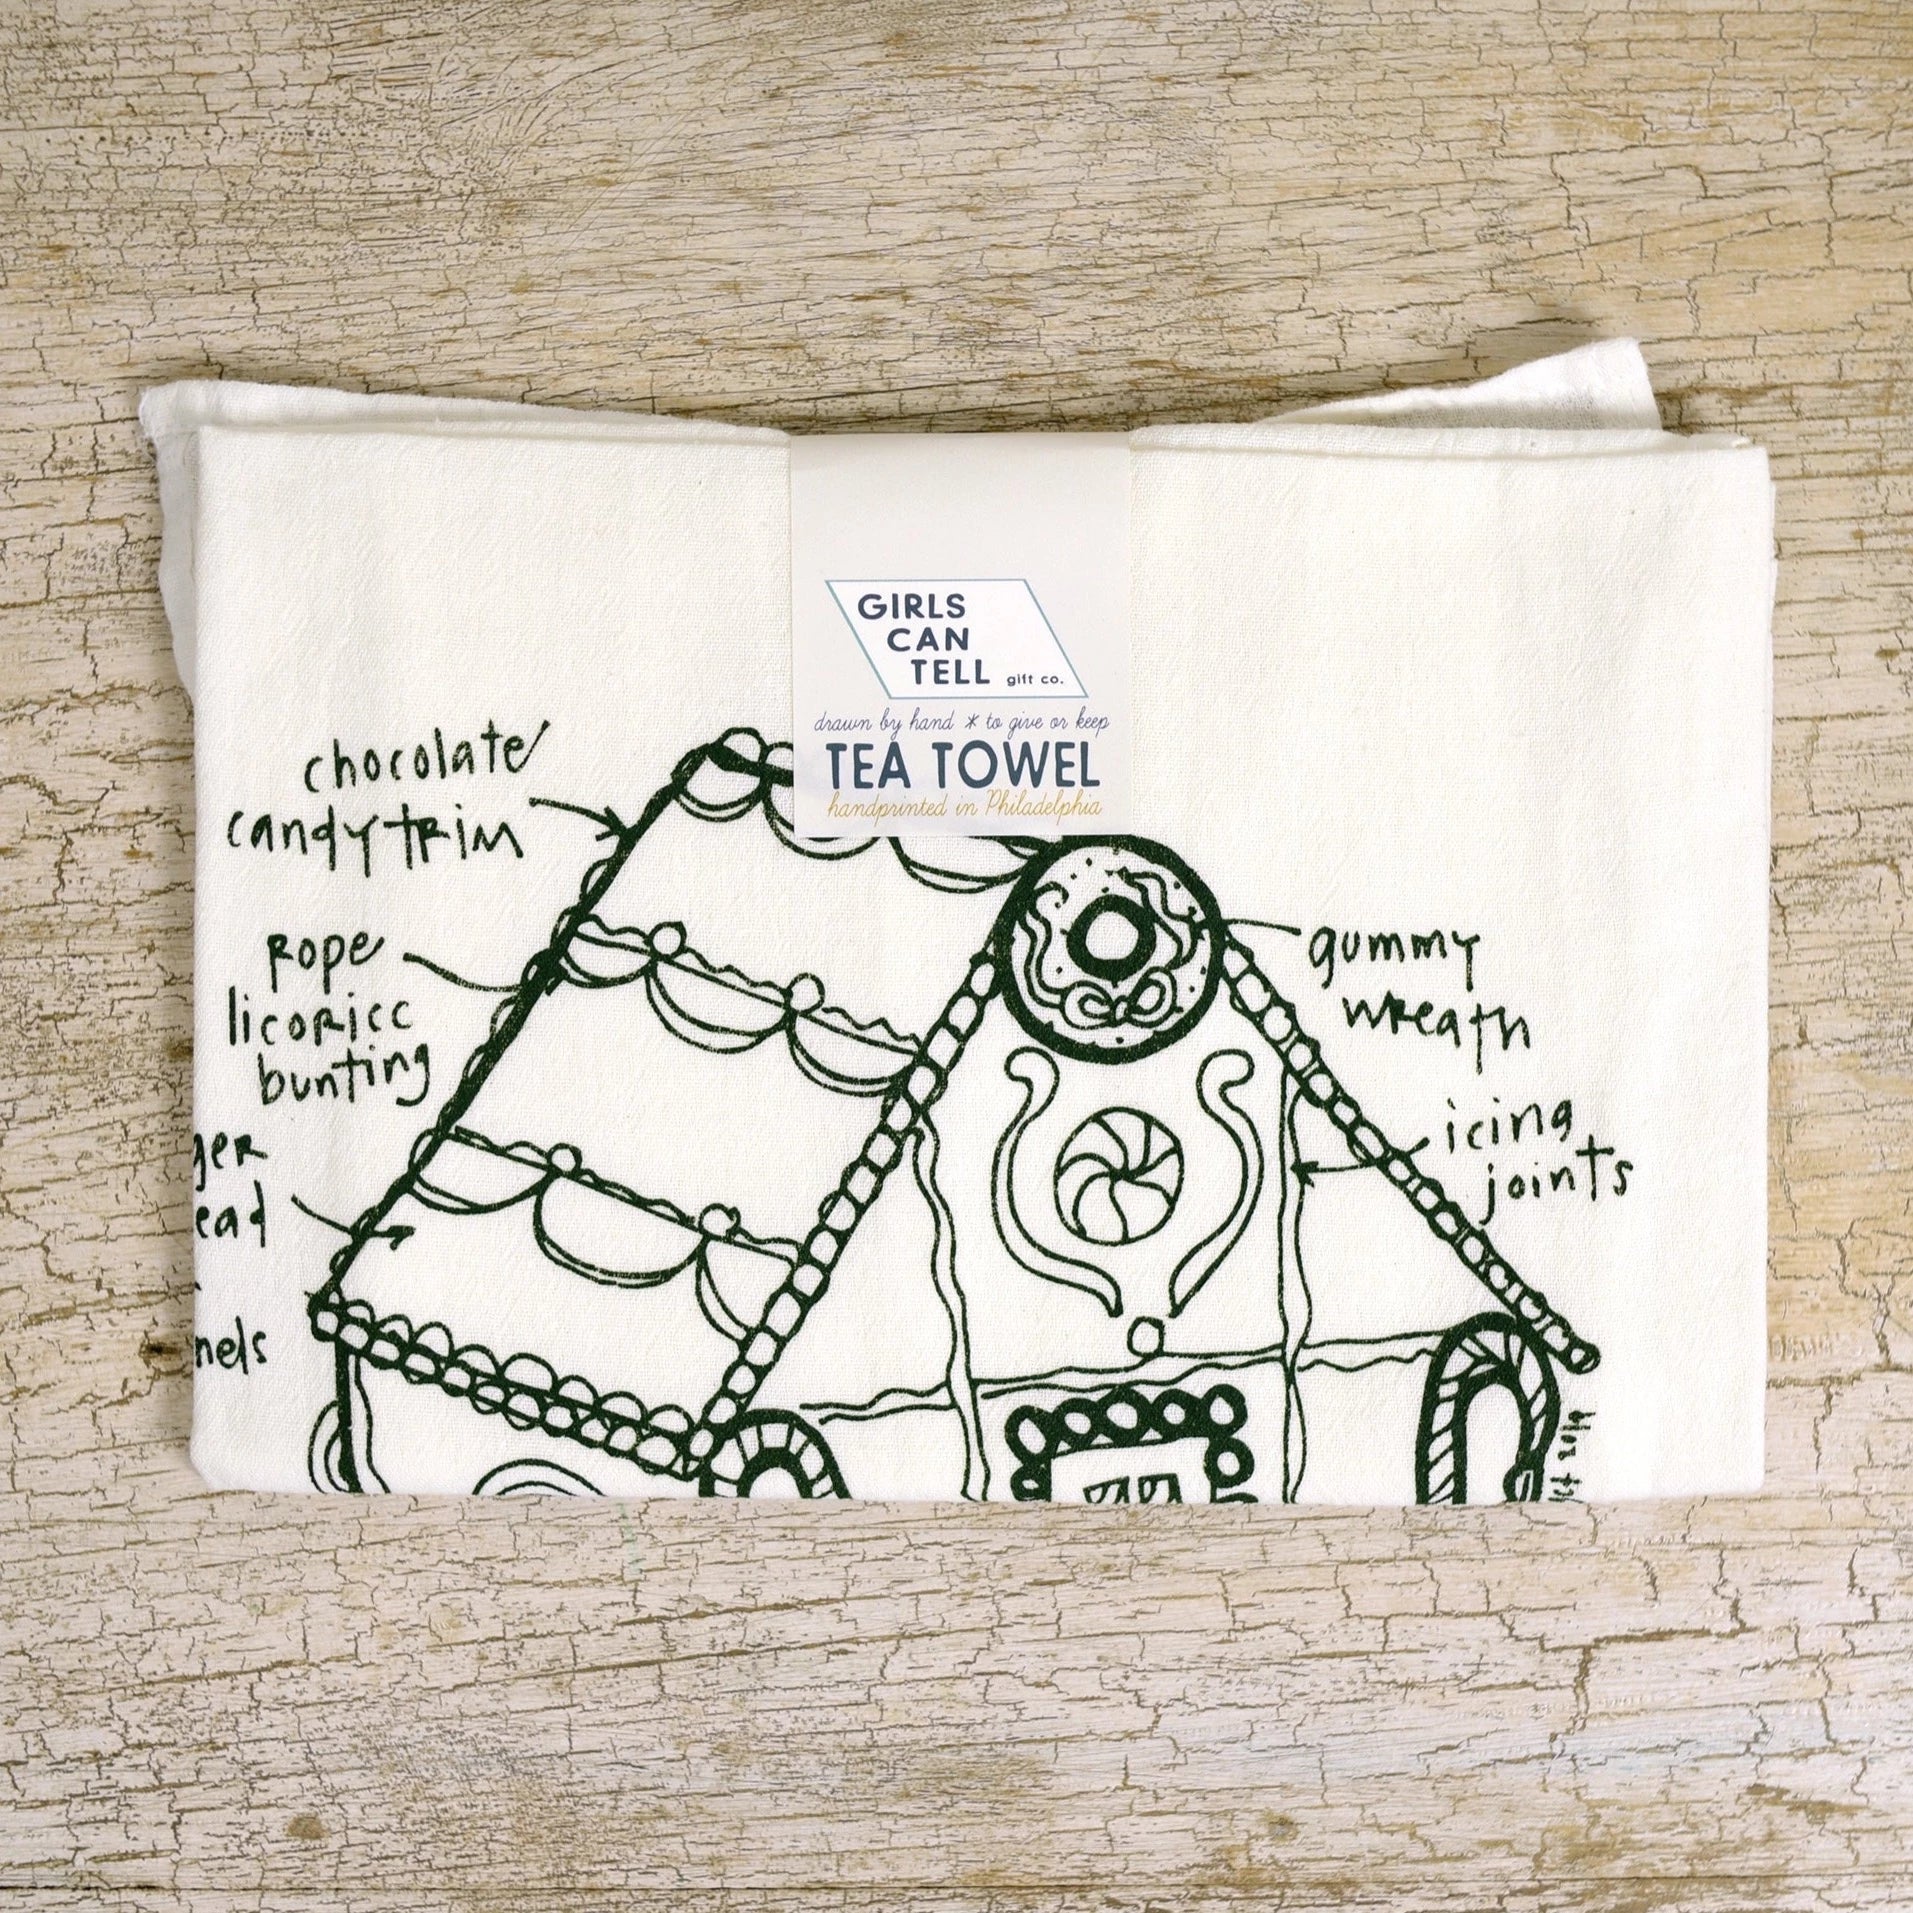 light wooden background with the gingerbread tea towel folded on top of it. Tea towel has black illustration of ginger bread house with arrows pointing to details on the house such as Chocolate candy trim, gummy wreath, icing joints